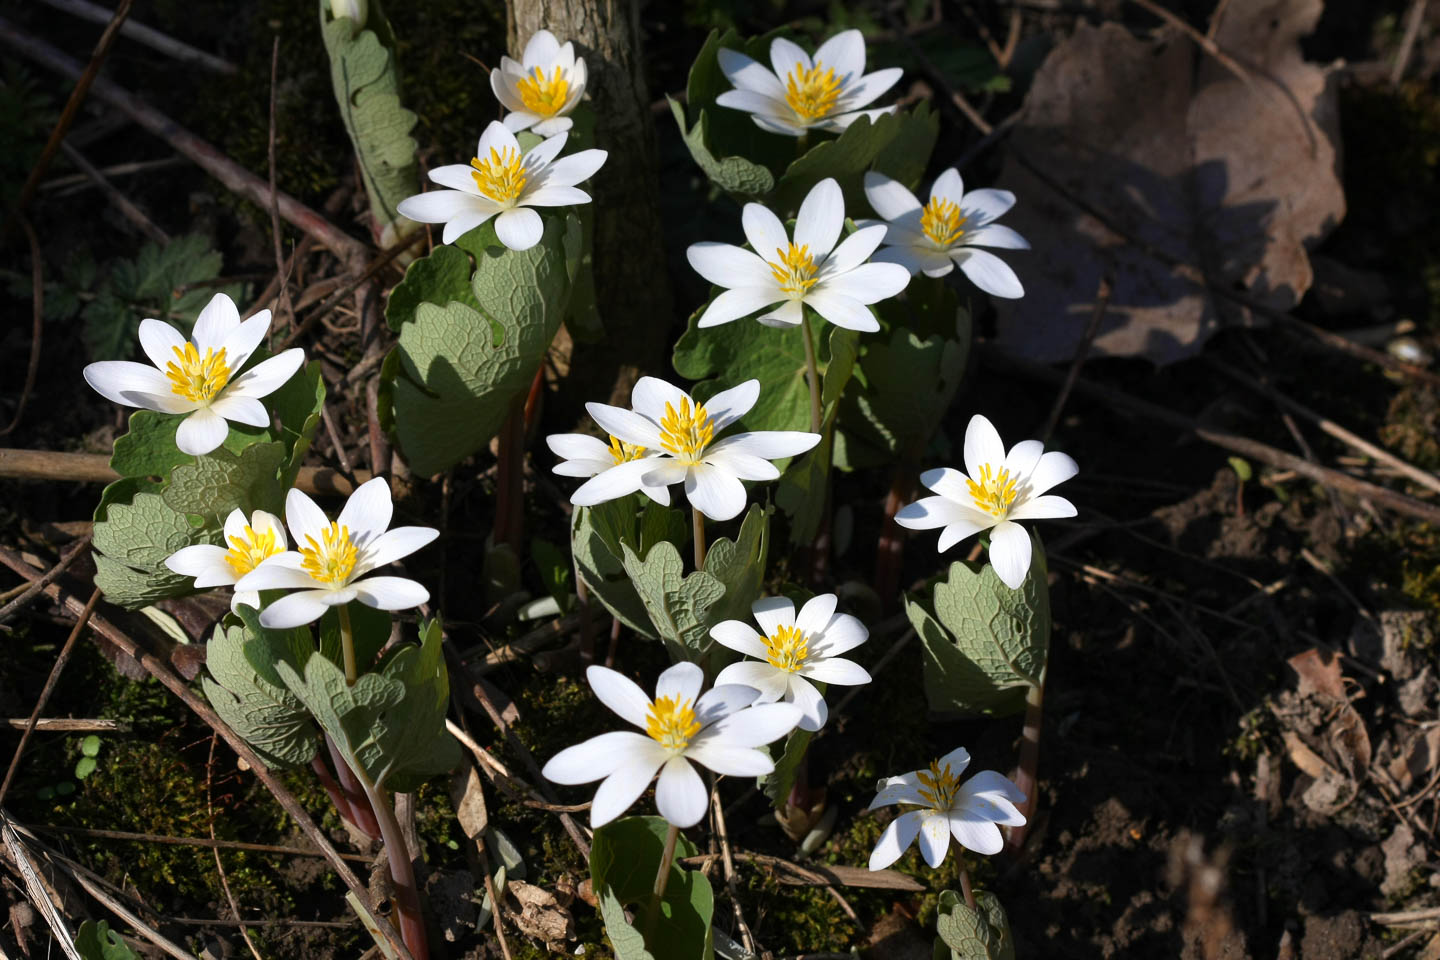 White bloodroot flowers